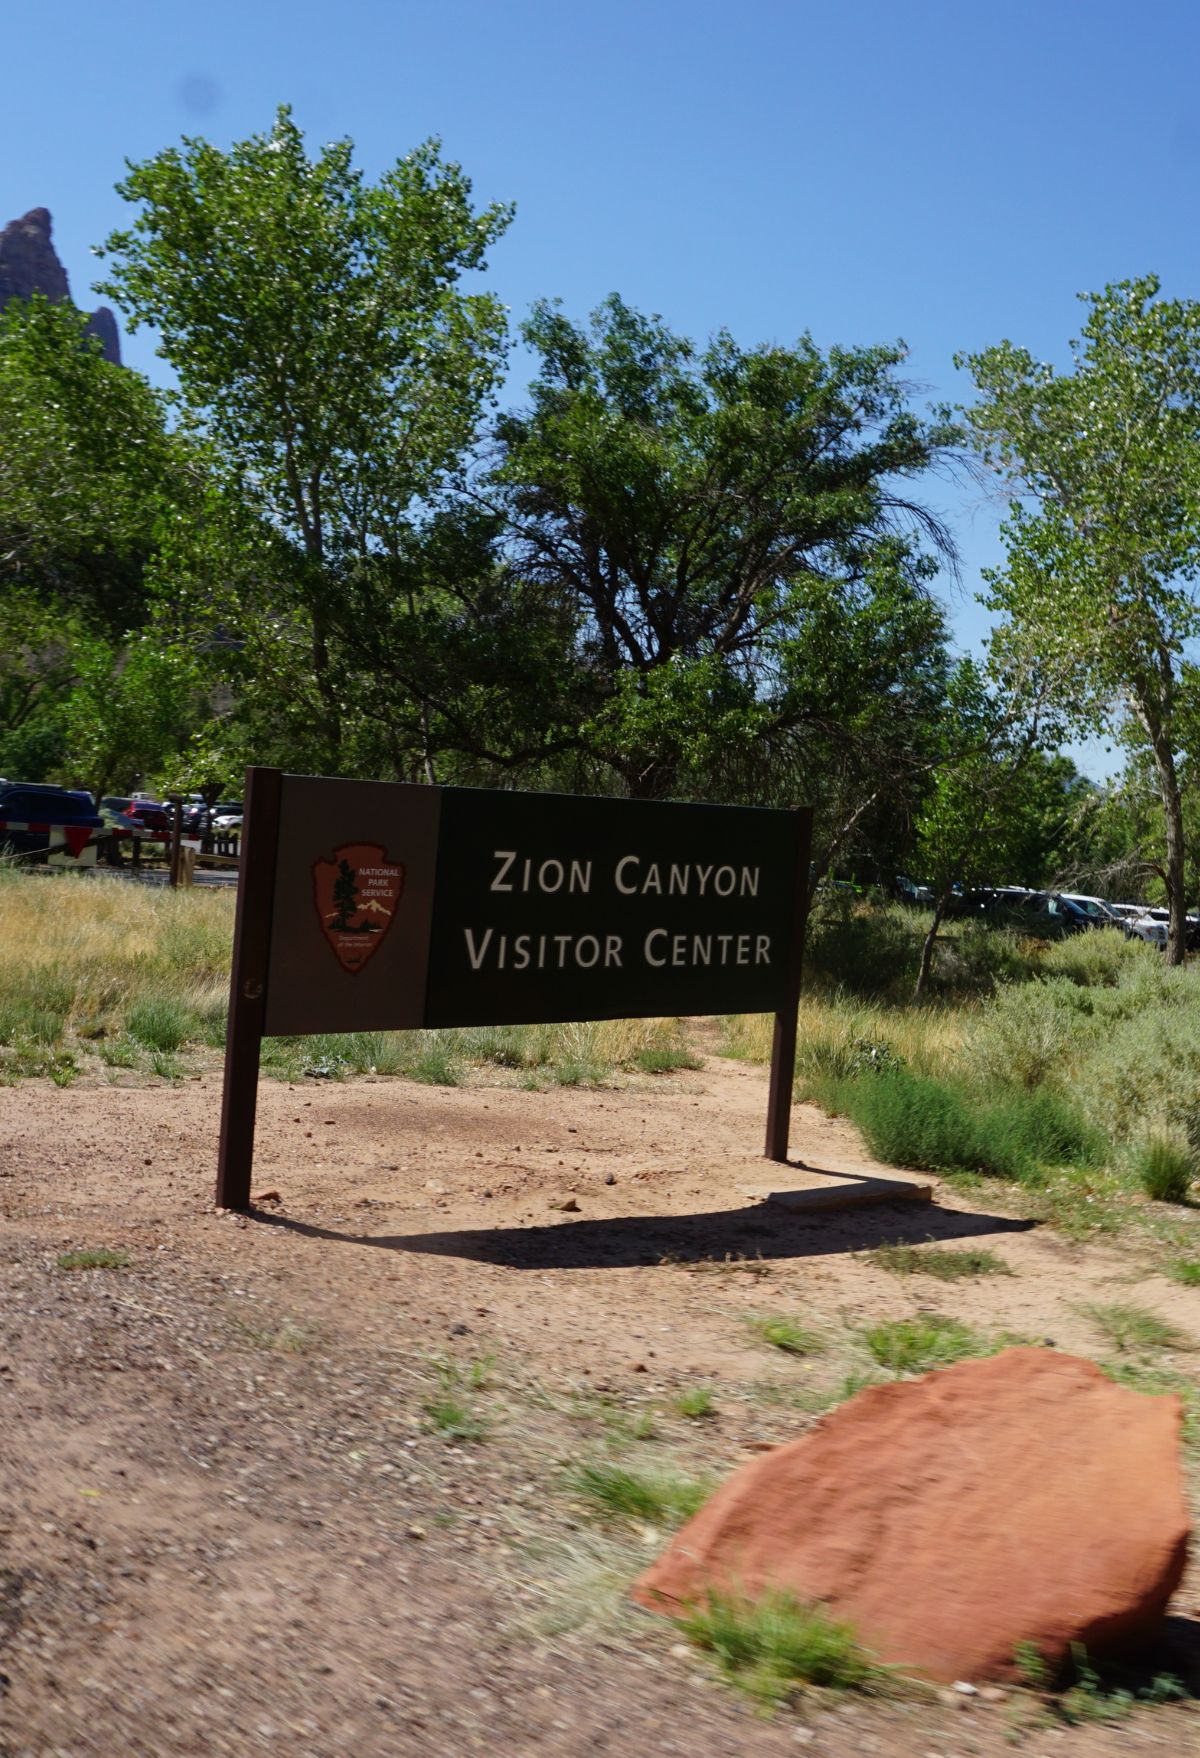 A sign for the Zion Canyon Visitor Center in Zion National Park, Utah.